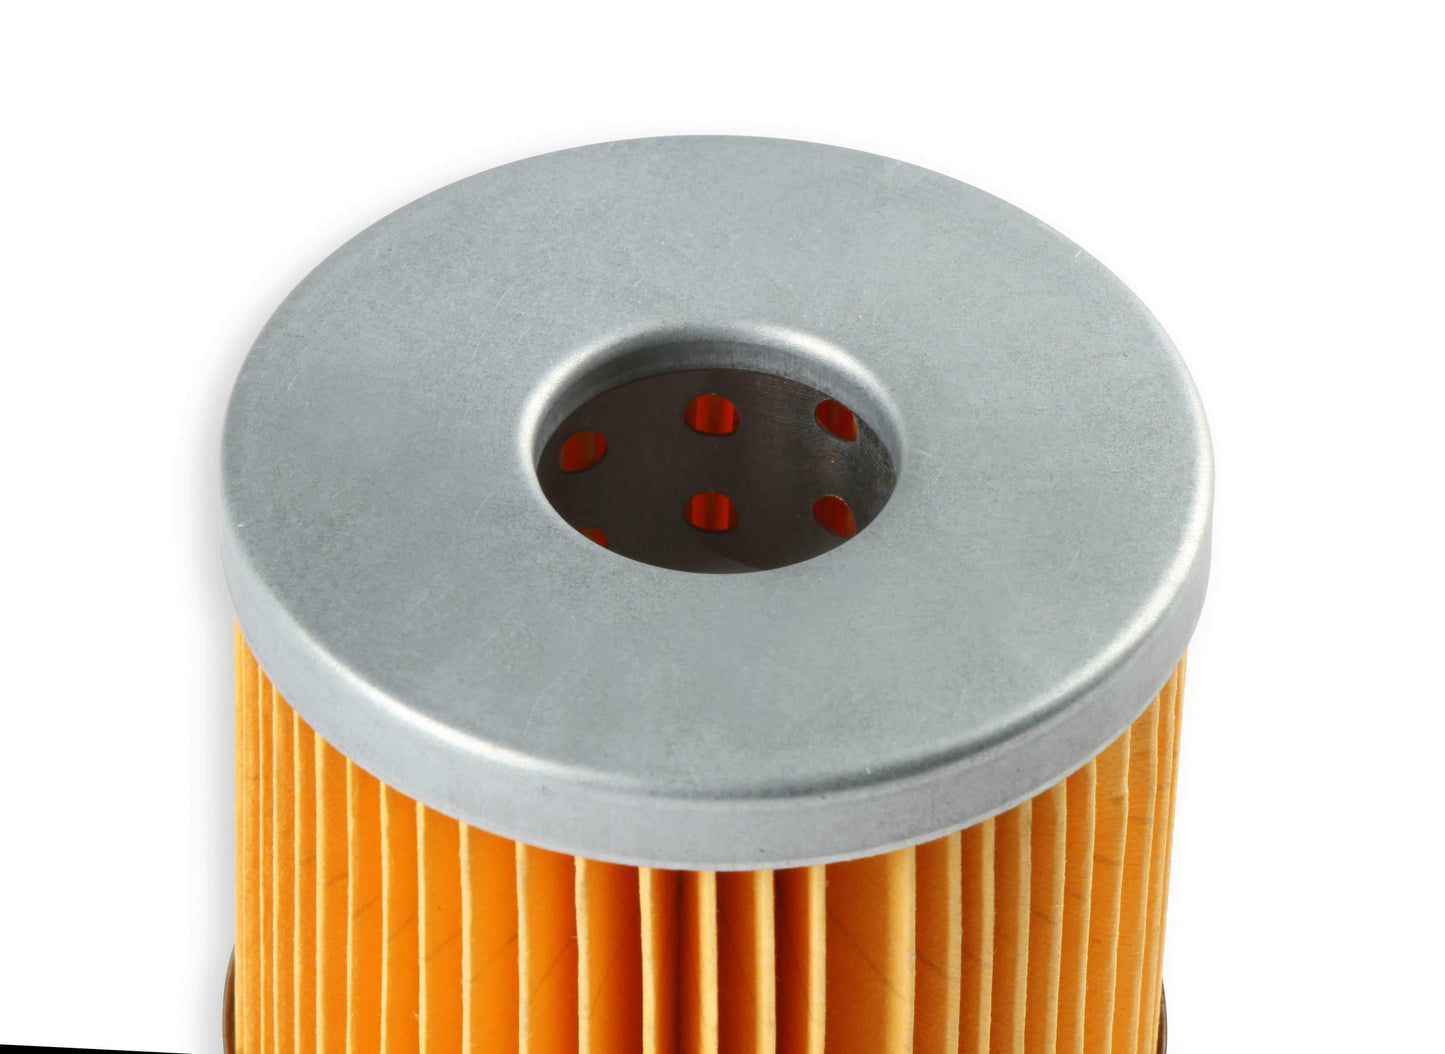 Mallory 29239 Mallory Paper Fuel Filter